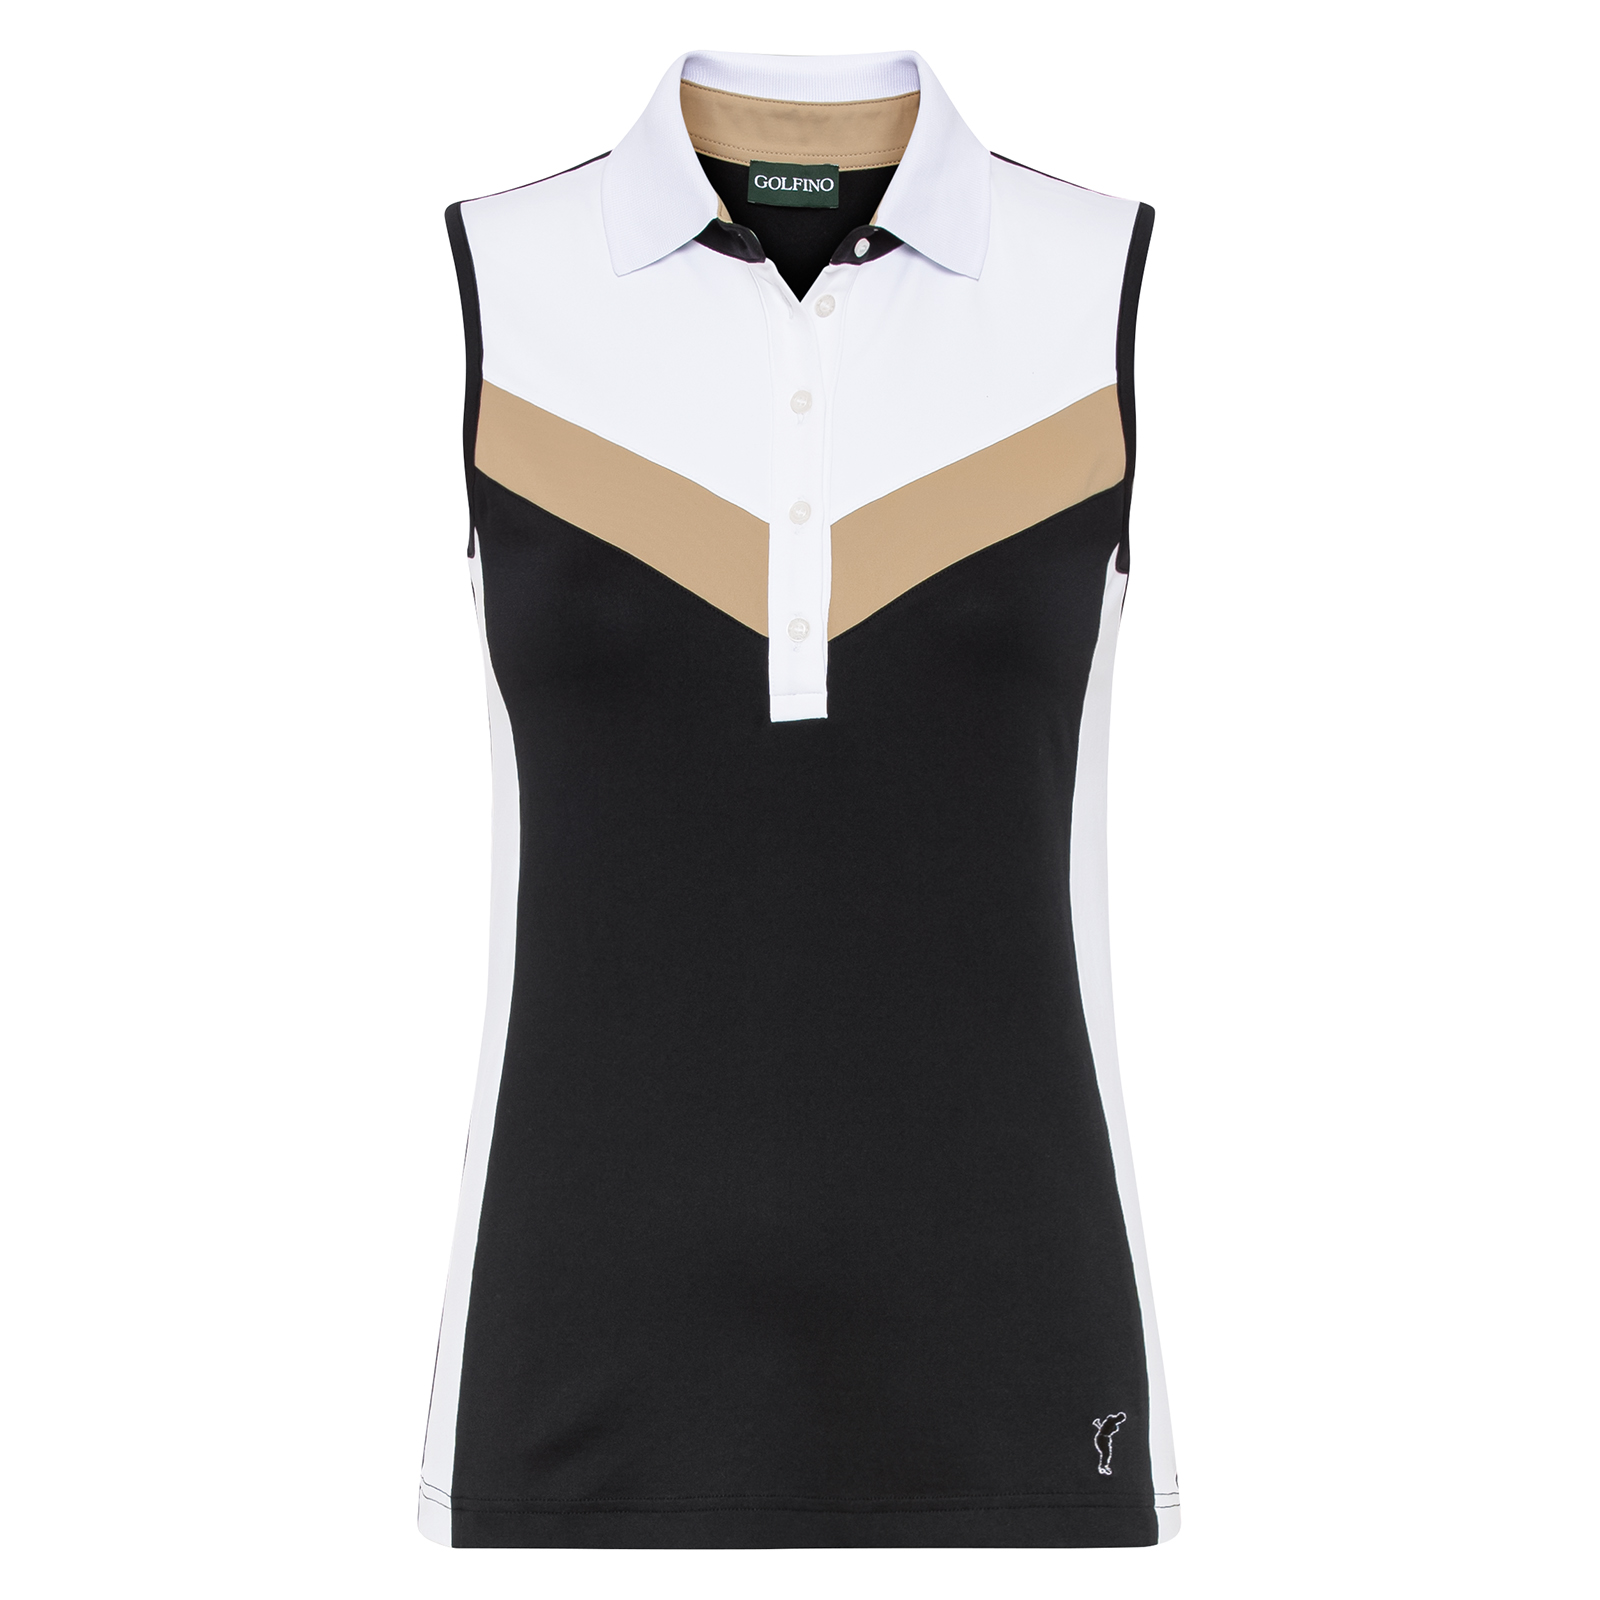 Ladies' sleeveless golf polo shirt with moisture management function